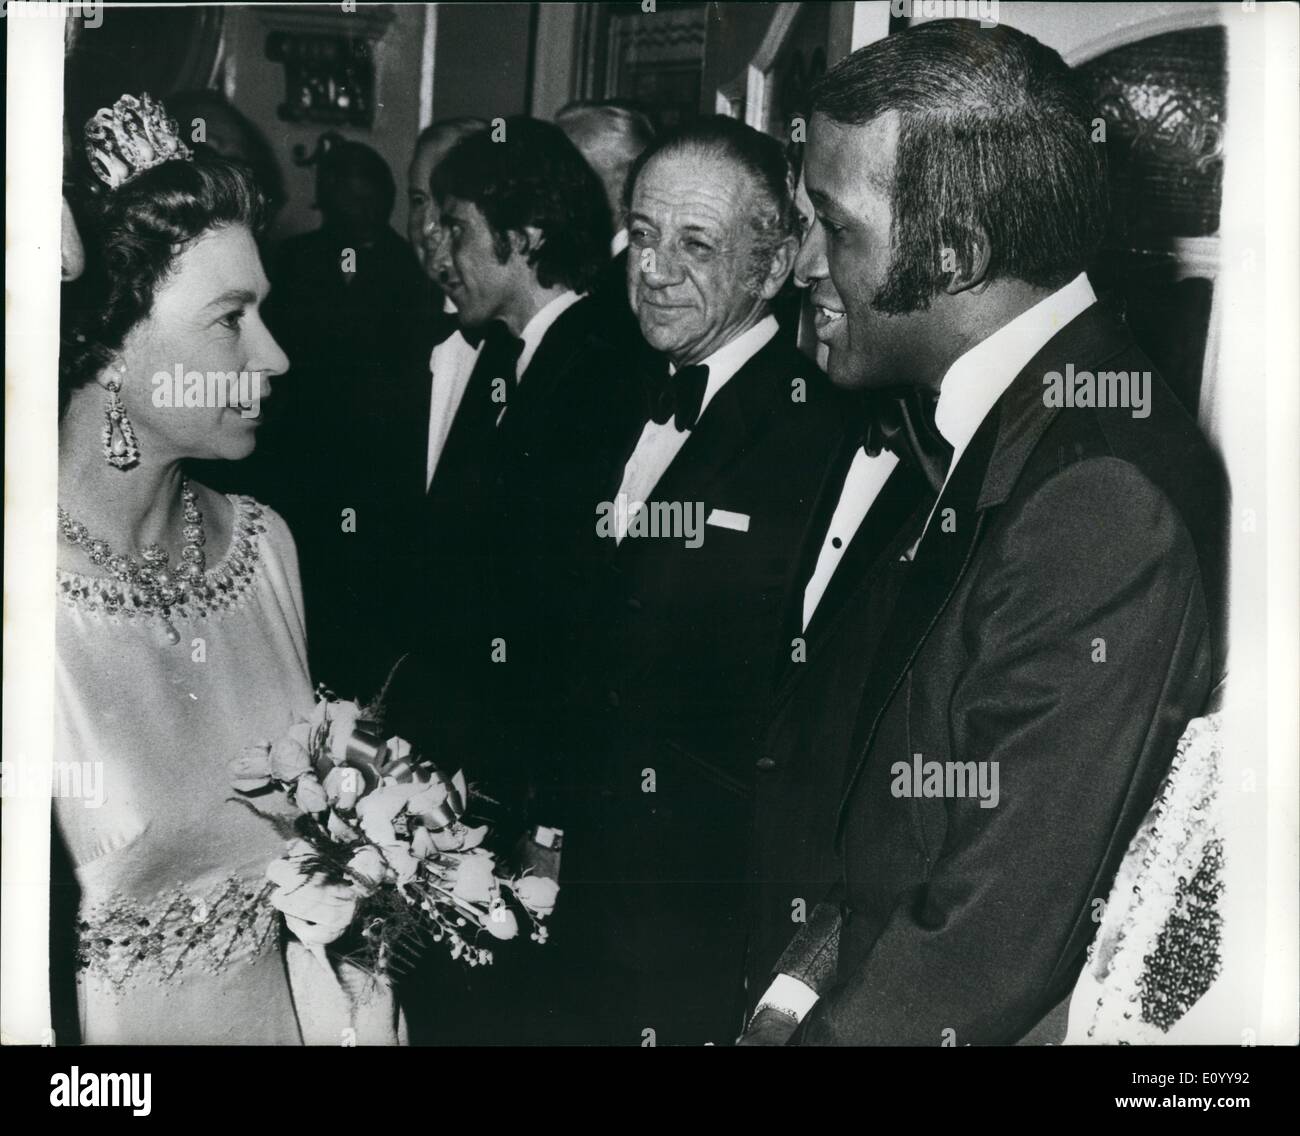 Nov. 11, 1971 - H.M. Queen at Royal Variety performance: Following last night's Royal Variety performance at the London Palladium. H.M. The Queen meets American singing star, Lovelace Watkins (right), who took park in the show. Next to Lovelace is comedian, Sidney James, Watkines, who flew from Melbourne, Australia for the one right performance, is due to return to Australia to continue his engagements there. Stock Photo